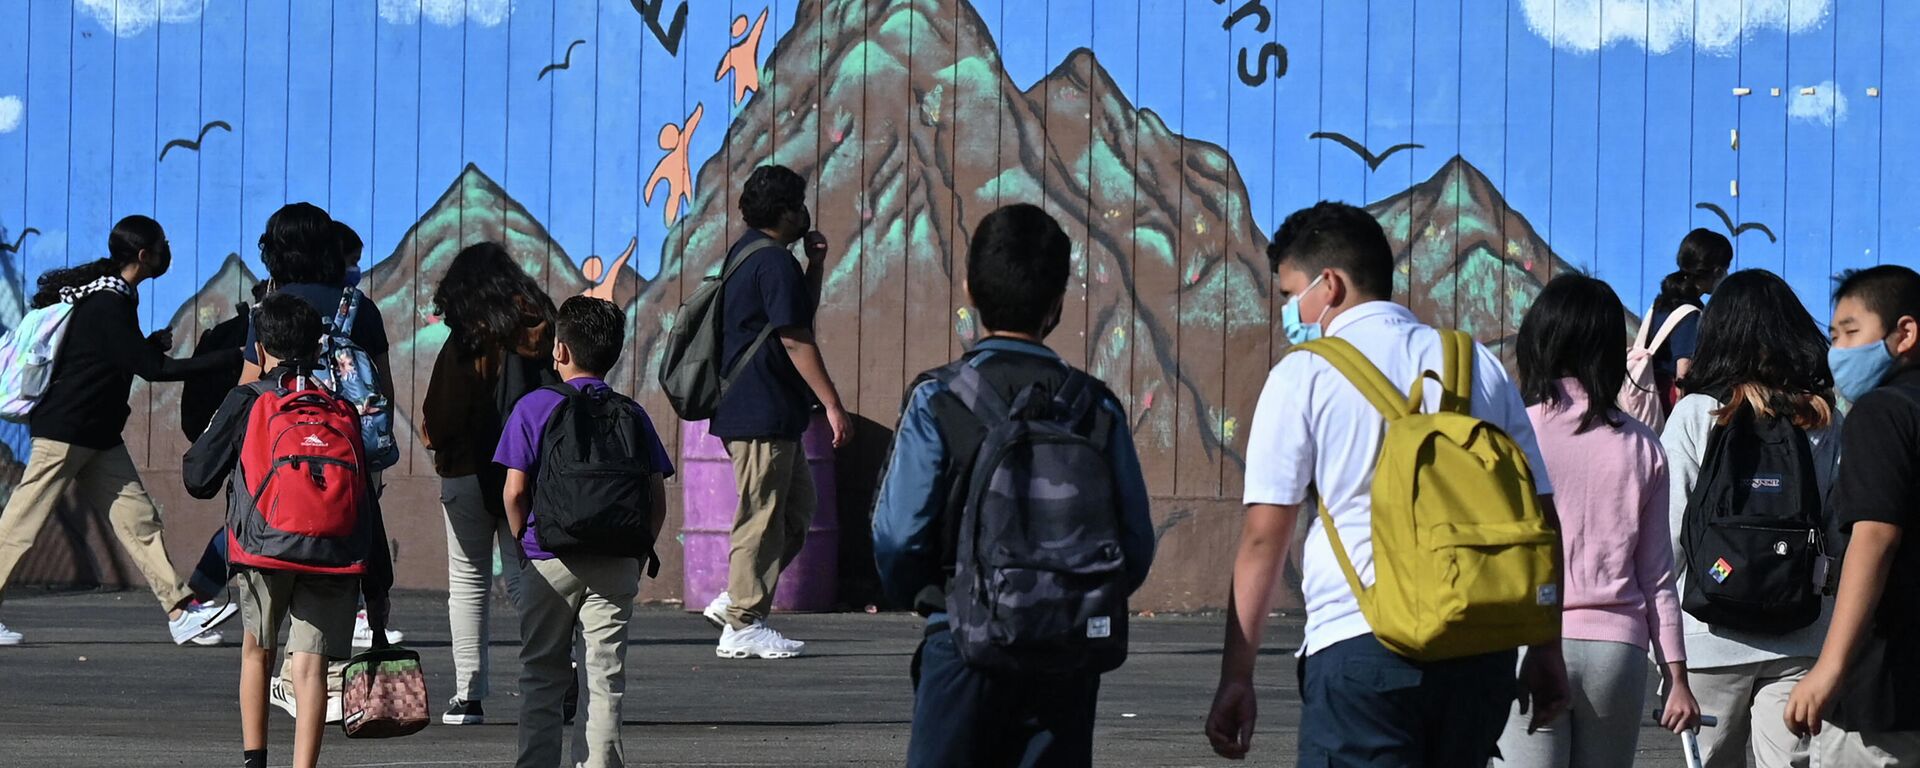 Students walk to their classrooms at a public middle school in Los Angeles, California, September 10, 2021 - Sputnik International, 1920, 07.12.2021